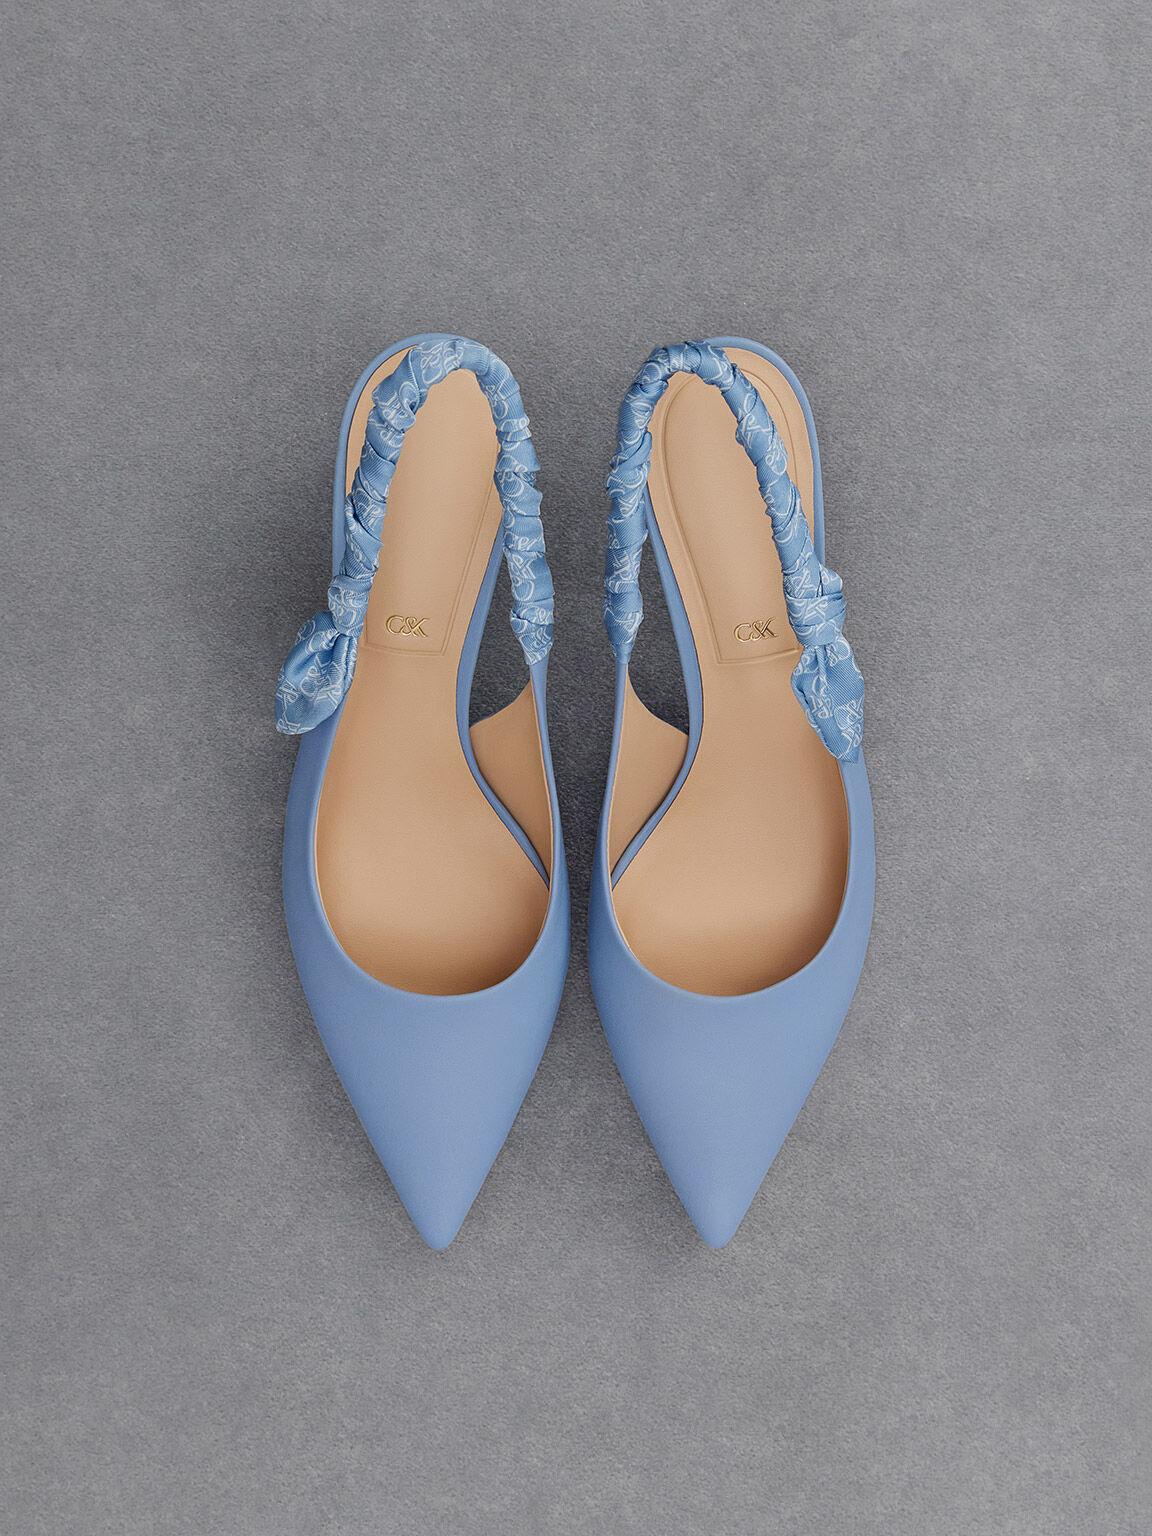 Tully Leather Ruched Print Slingback Pumps, Light Blue, hi-res